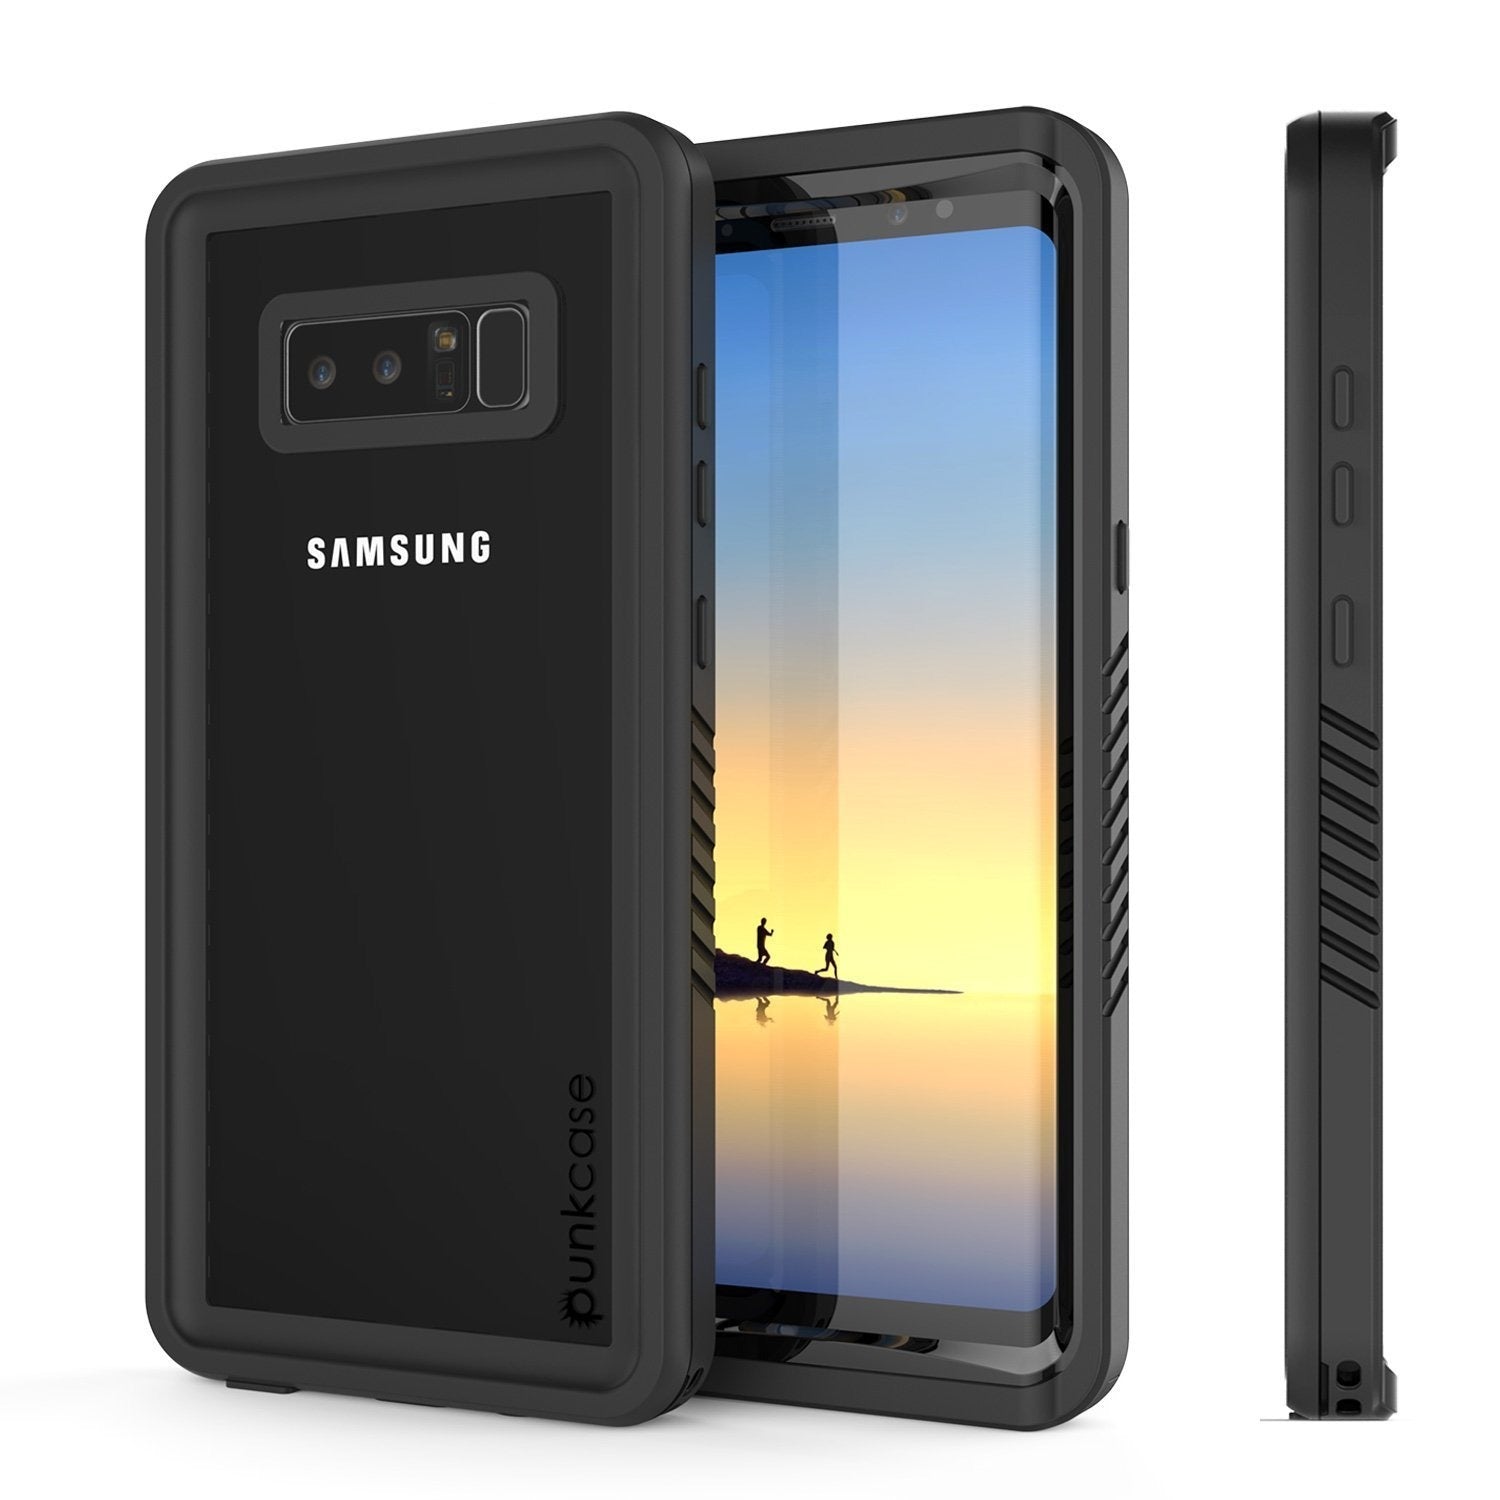 Galaxy Note 8 Case, Punkcase [Extreme Series] [Slim Fit] [IP68 Certified] [Shockproof] Armor Cover W/ Built In Screen Protector [Black]